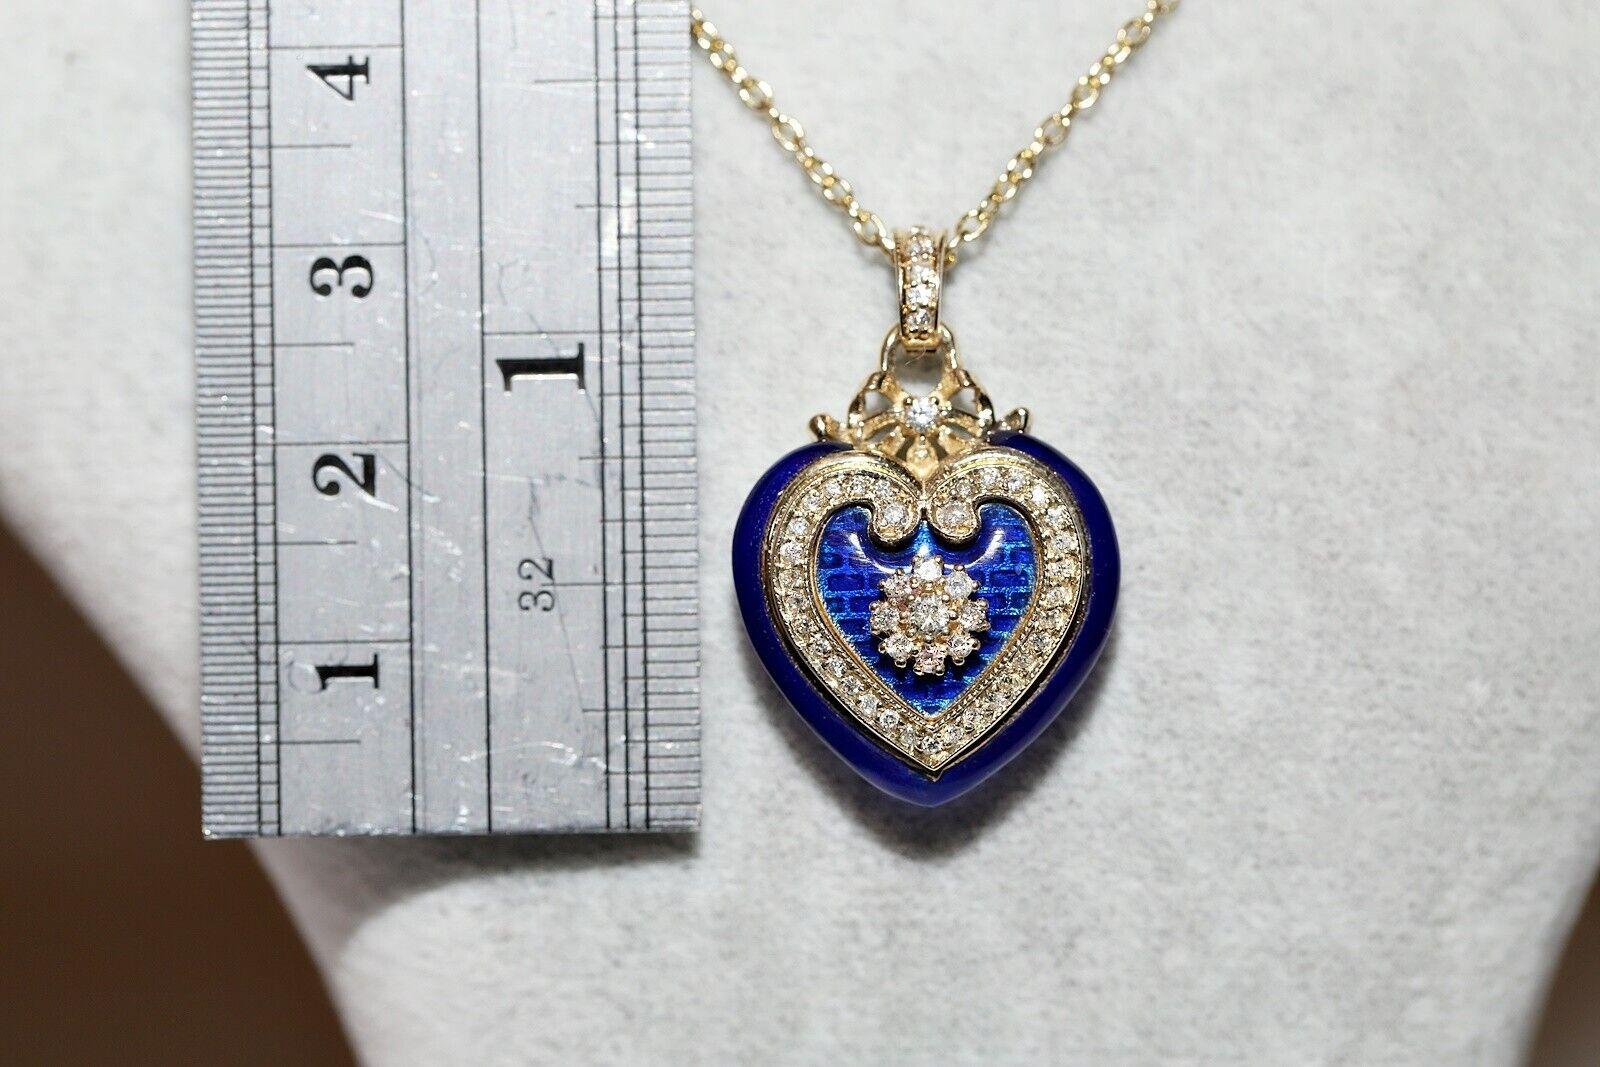 New Made 14k Gold Natural Diamond And Enamel Decorated Heart Pendant Necklace For Sale 9